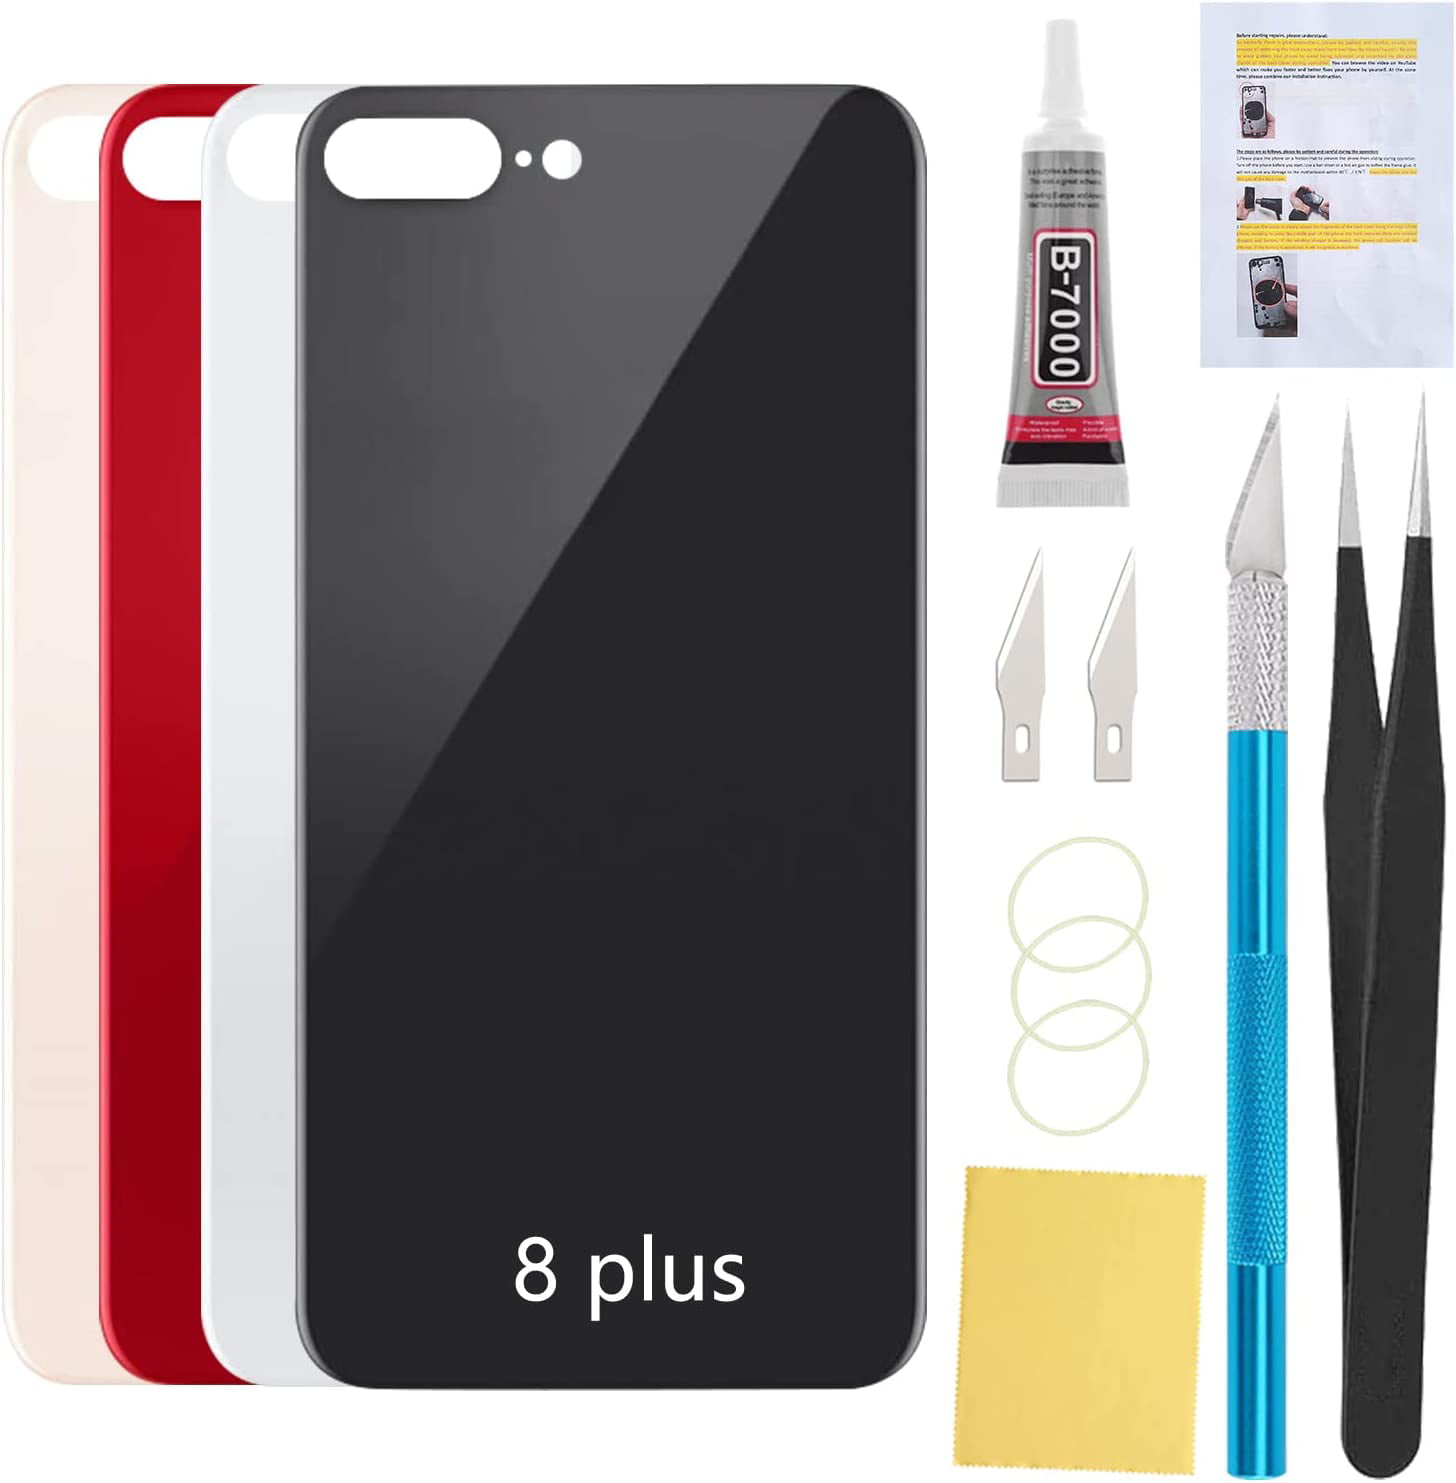 5.5 Inch Day-market 2 PCS Back Glass Replacement for iPhone 8 Plus Back Cover Glass with Pre-Installed Tape and Repair Tools Space Gray 